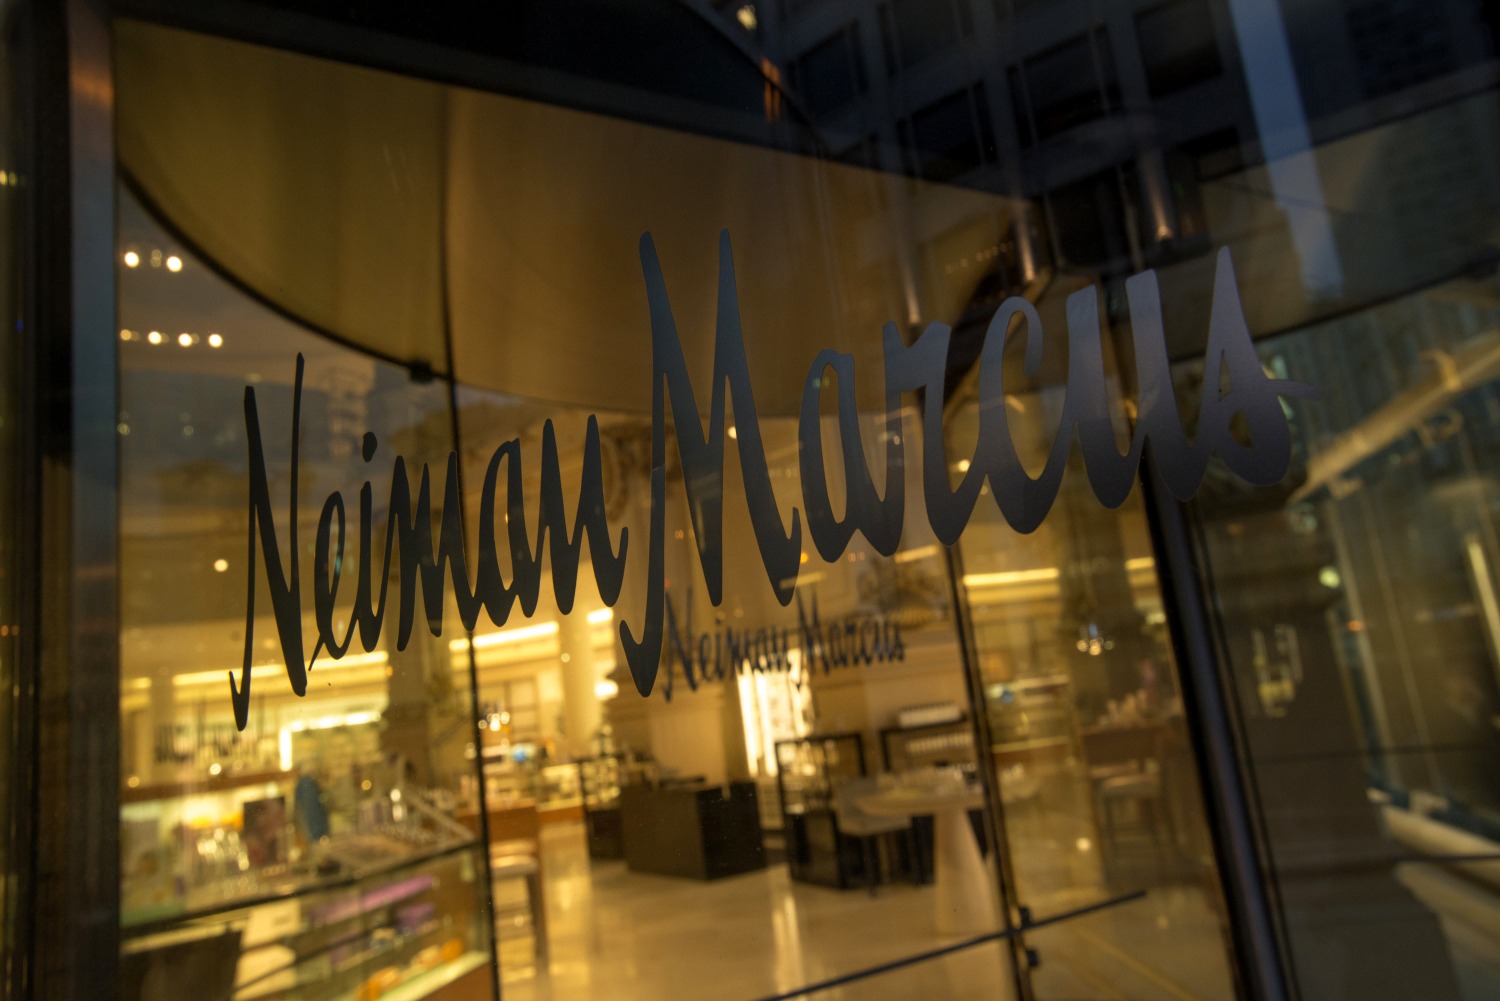 Neiman Marcus could file for bankruptcy this week, report suggests